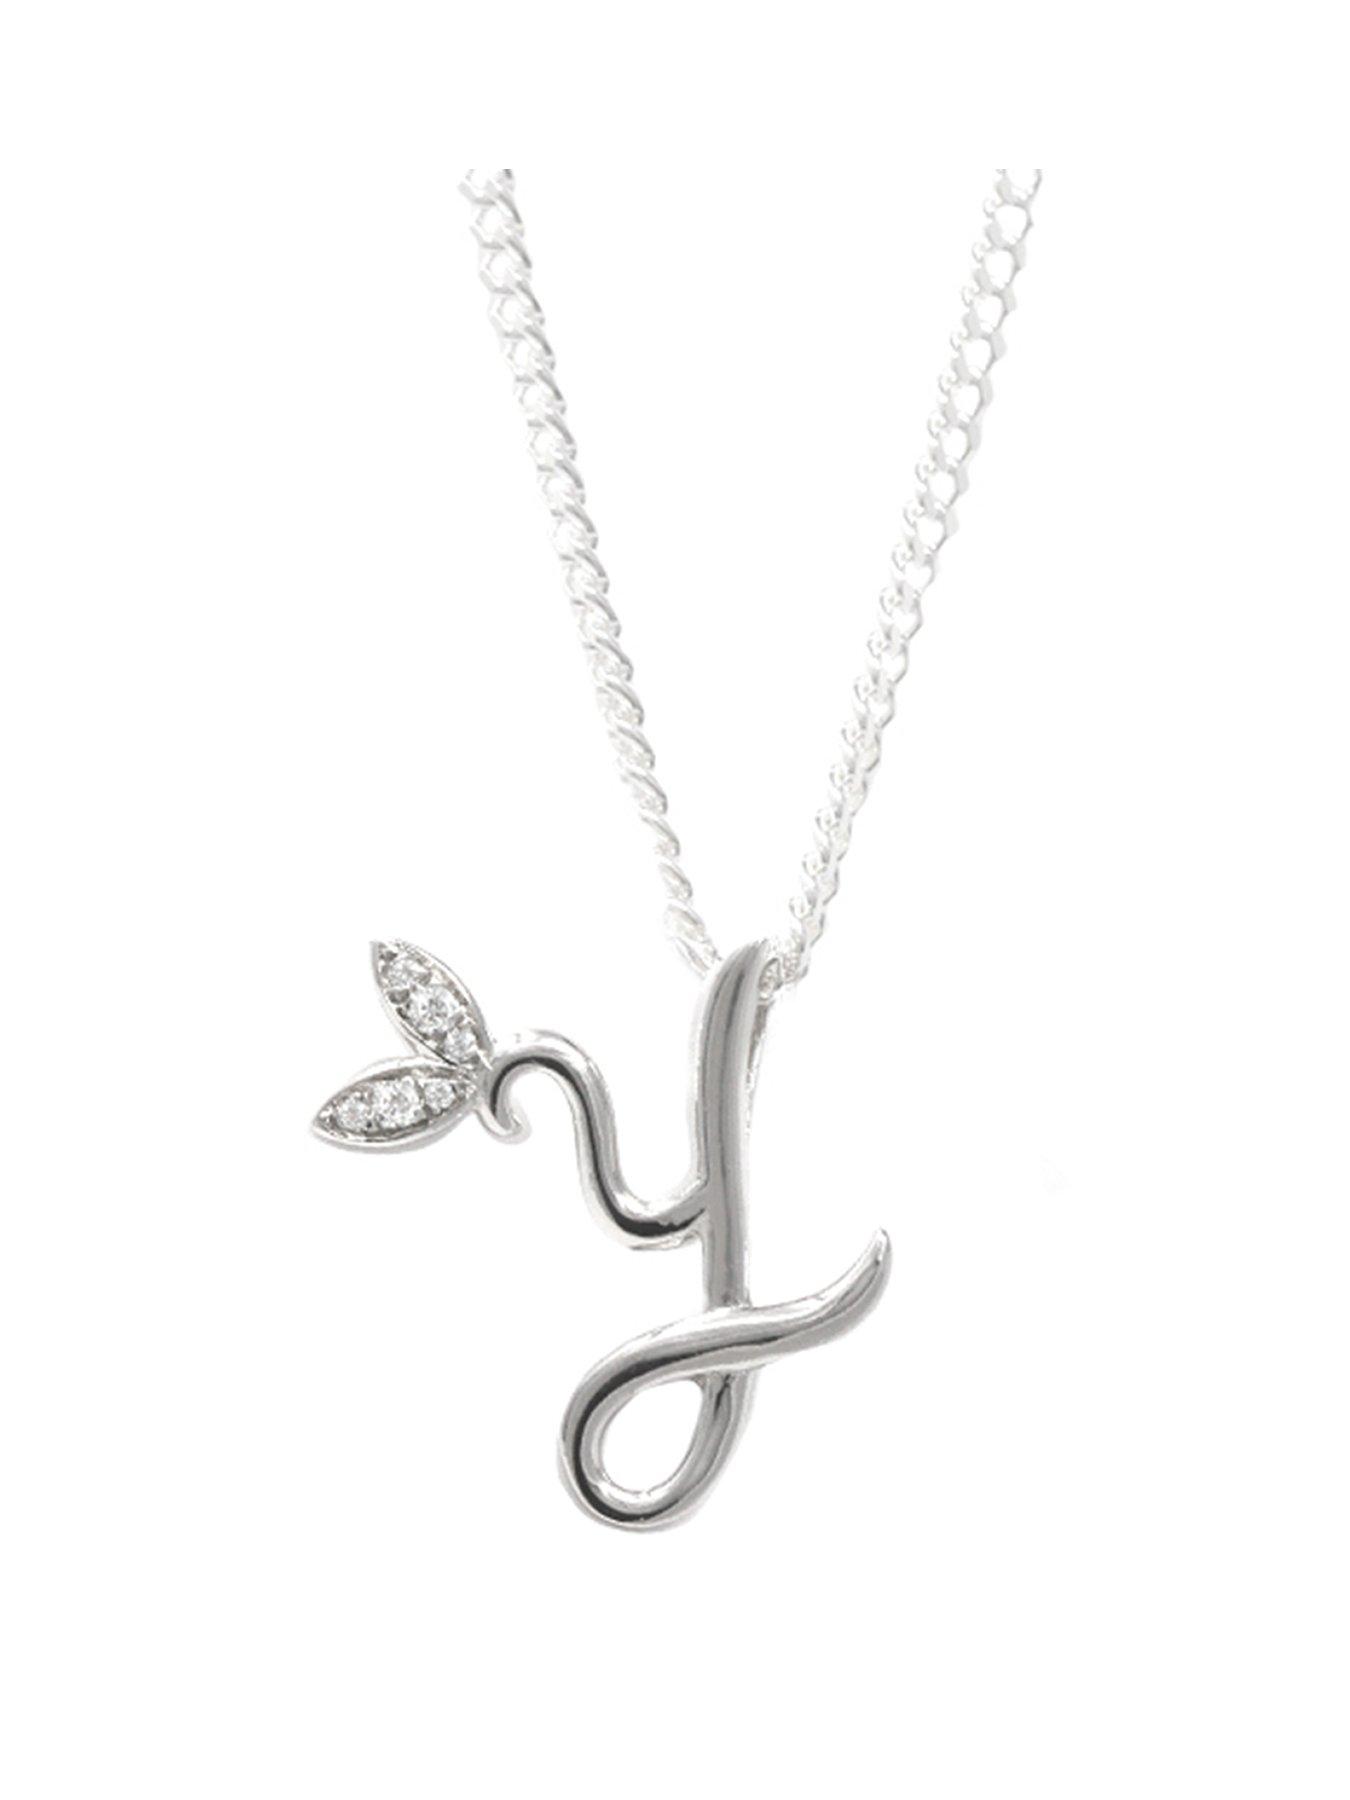 CELESTIA Initial Sterling Silver Necklaces for Women, Letter A Pendant  Necklace 26 Alphabet Jewelry Personalized Gifts - 18'' Chain : Buy Online  at Best Price in KSA - Souq is now Amazon.sa: Fashion